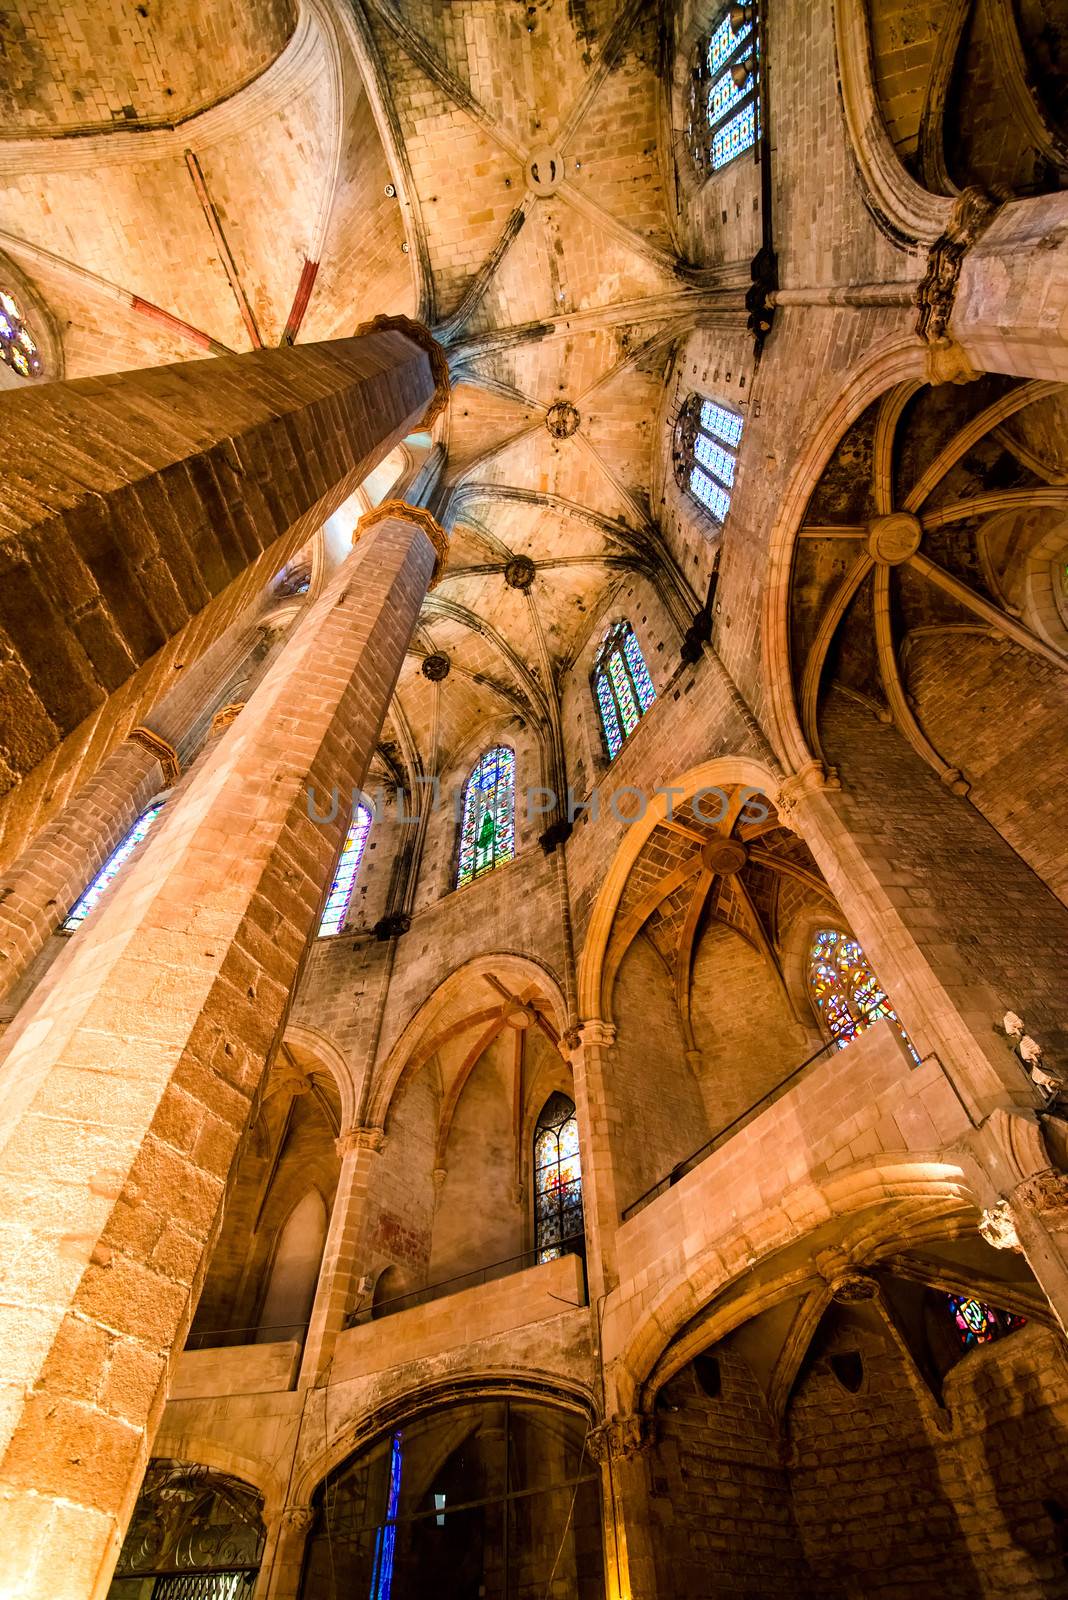 BARCELONA - JUNE 06: Cathedral of the Holy Cross and Saint Eulalia. It is the seat of the Archbishop of Barcelona and the main cathedral of Barcelona. June 06, 2013, Barcelona, Spain